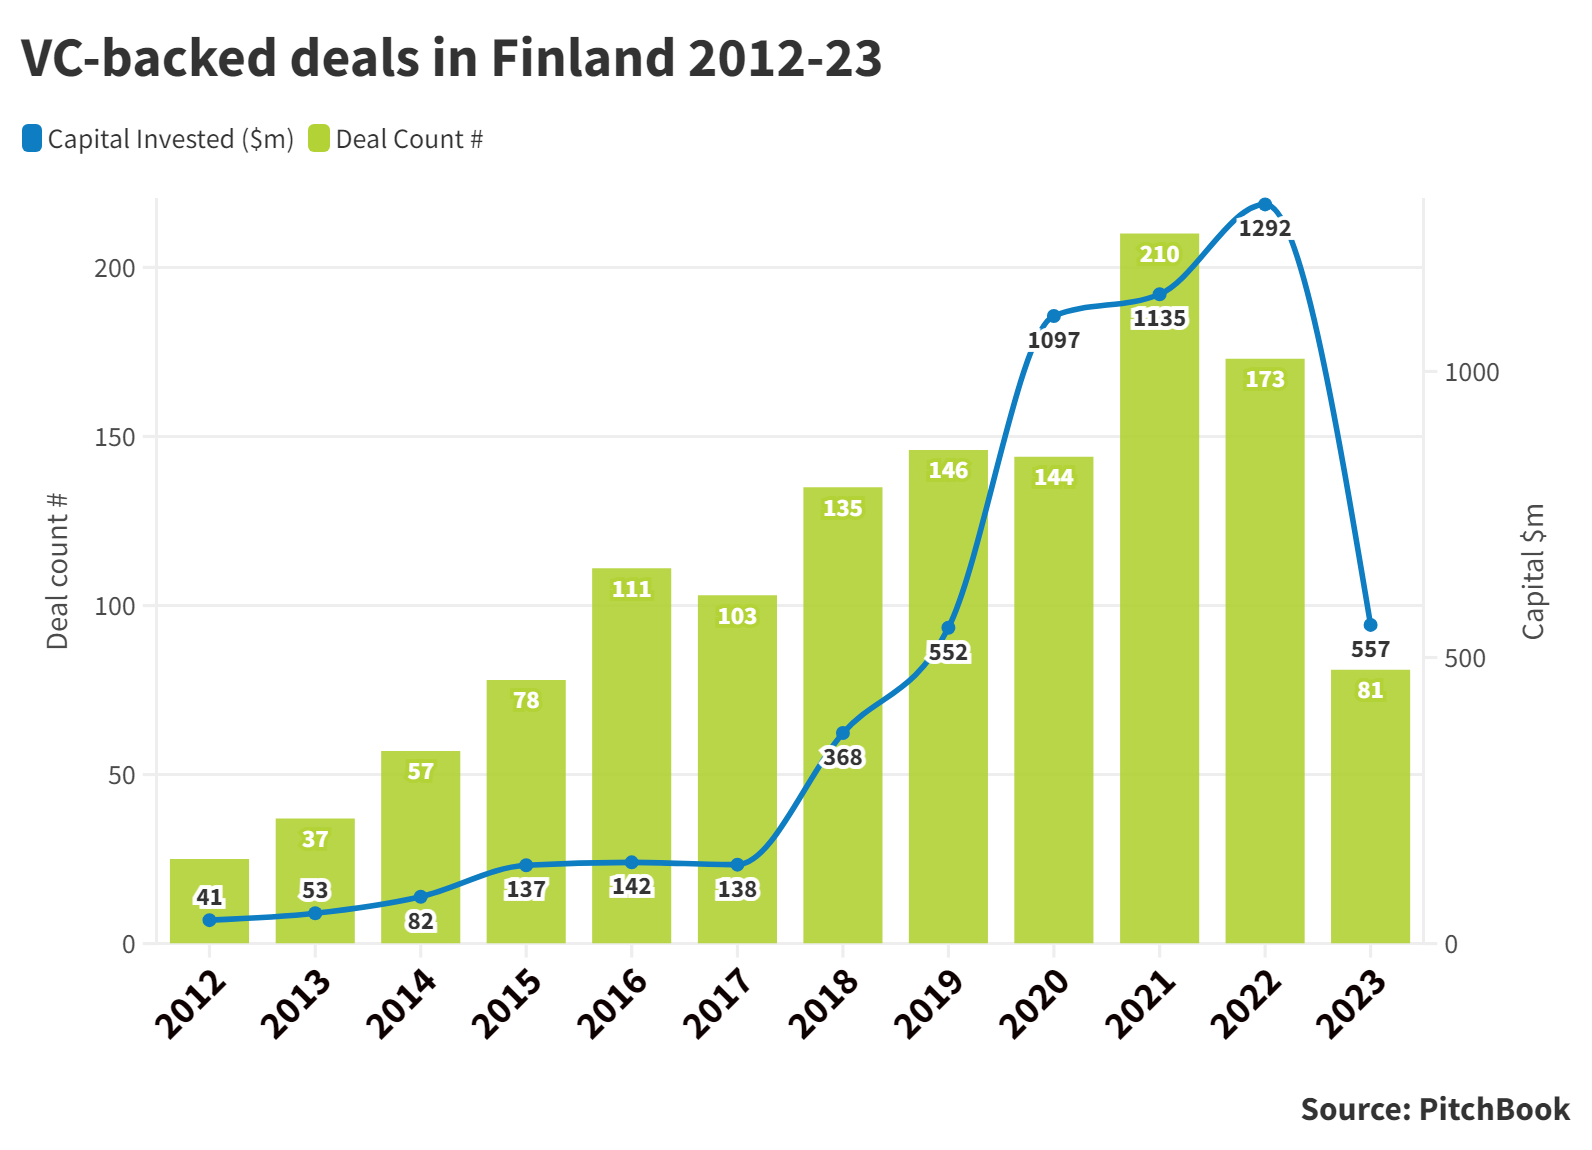 Bar and line chart showing VC-backed deals in Finland 2012-23. Source: PitchBook